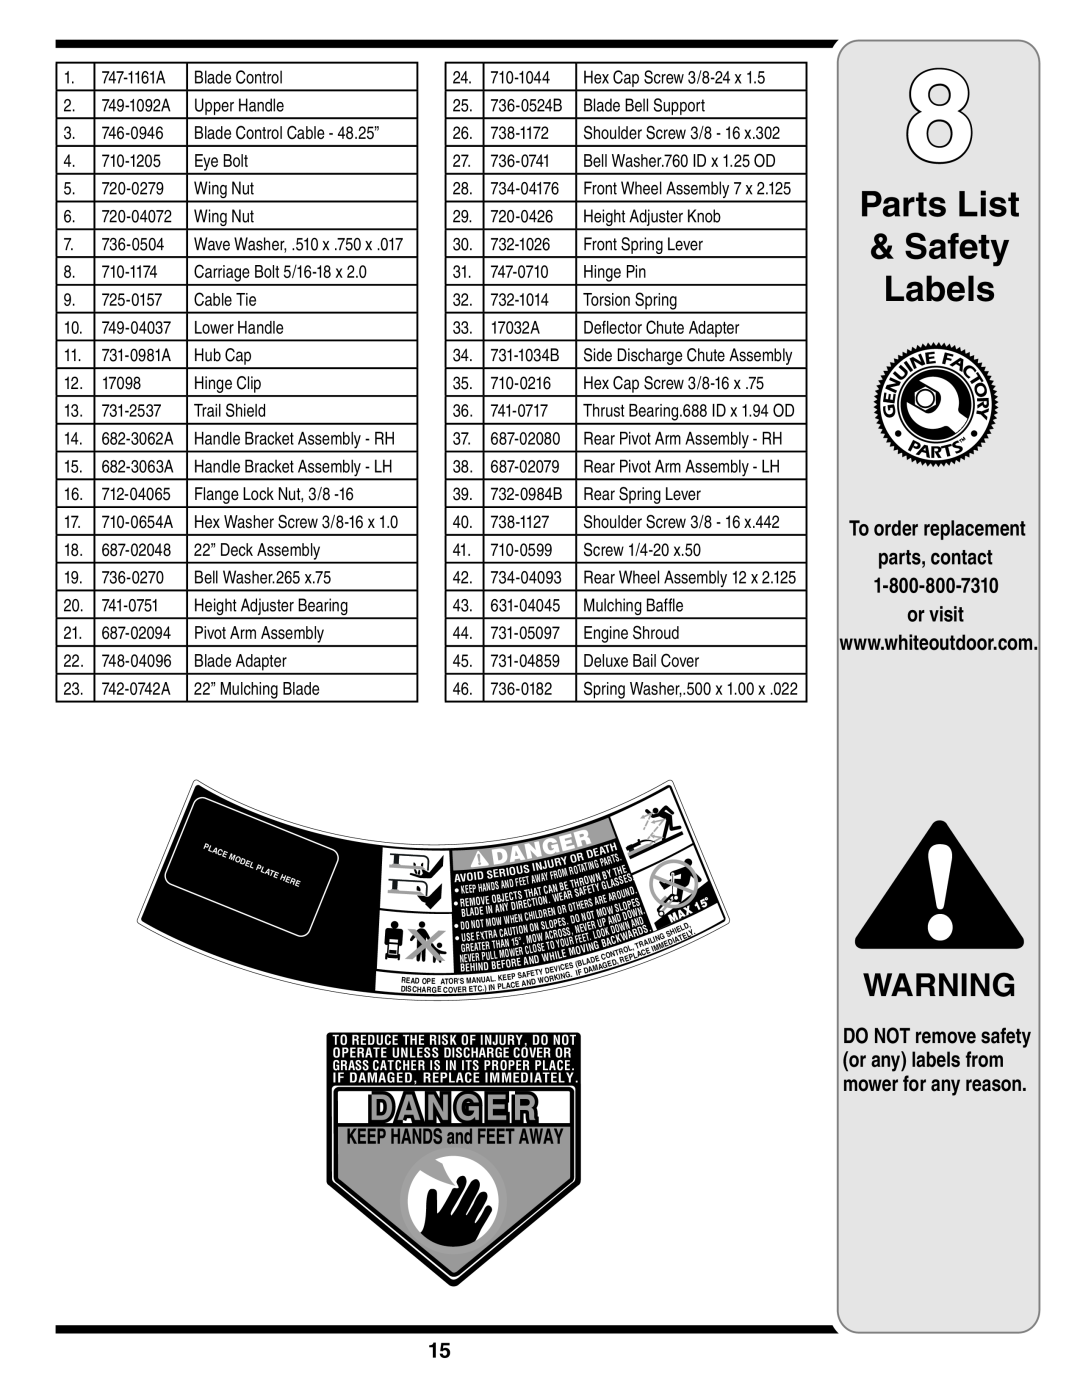 White Outdoor 500 warranty Parts List Safety Labels, DO NOT remove safety or any labels from mower for any reason 